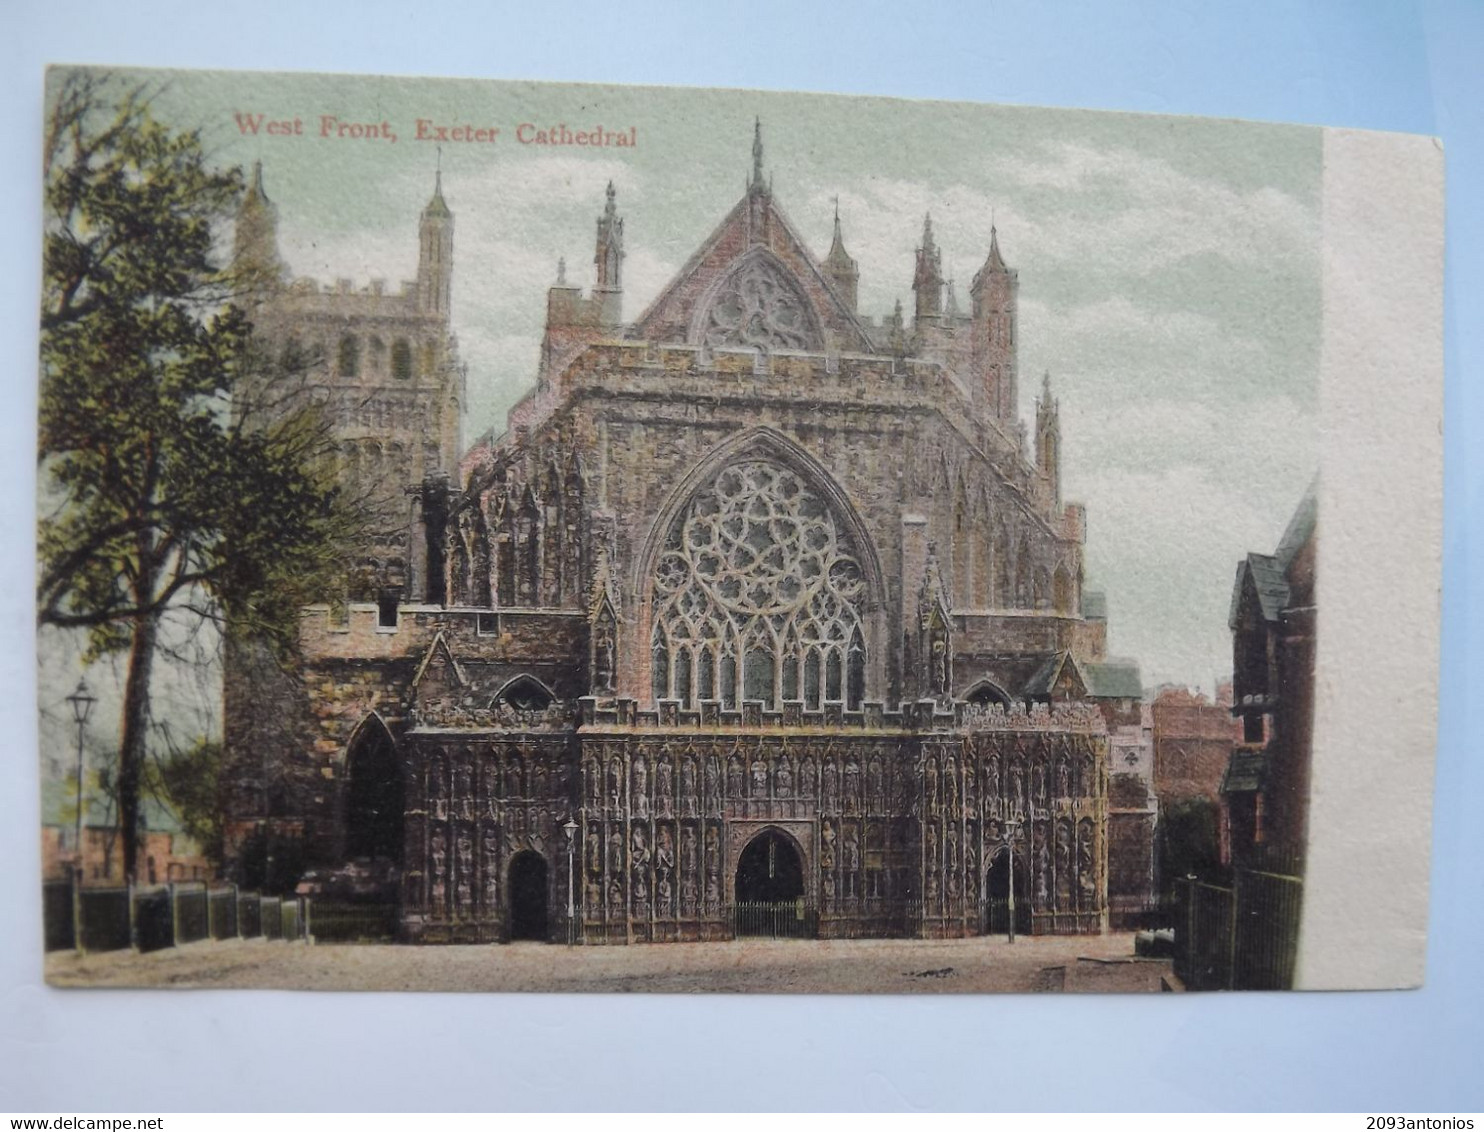 237)   EXETER WEST FRONT CATHEDRAL LONDRA LONDON  CARTOLINA   VIAGGIATA   FORMATO PICCOLO ANNO 1904 - Exeter